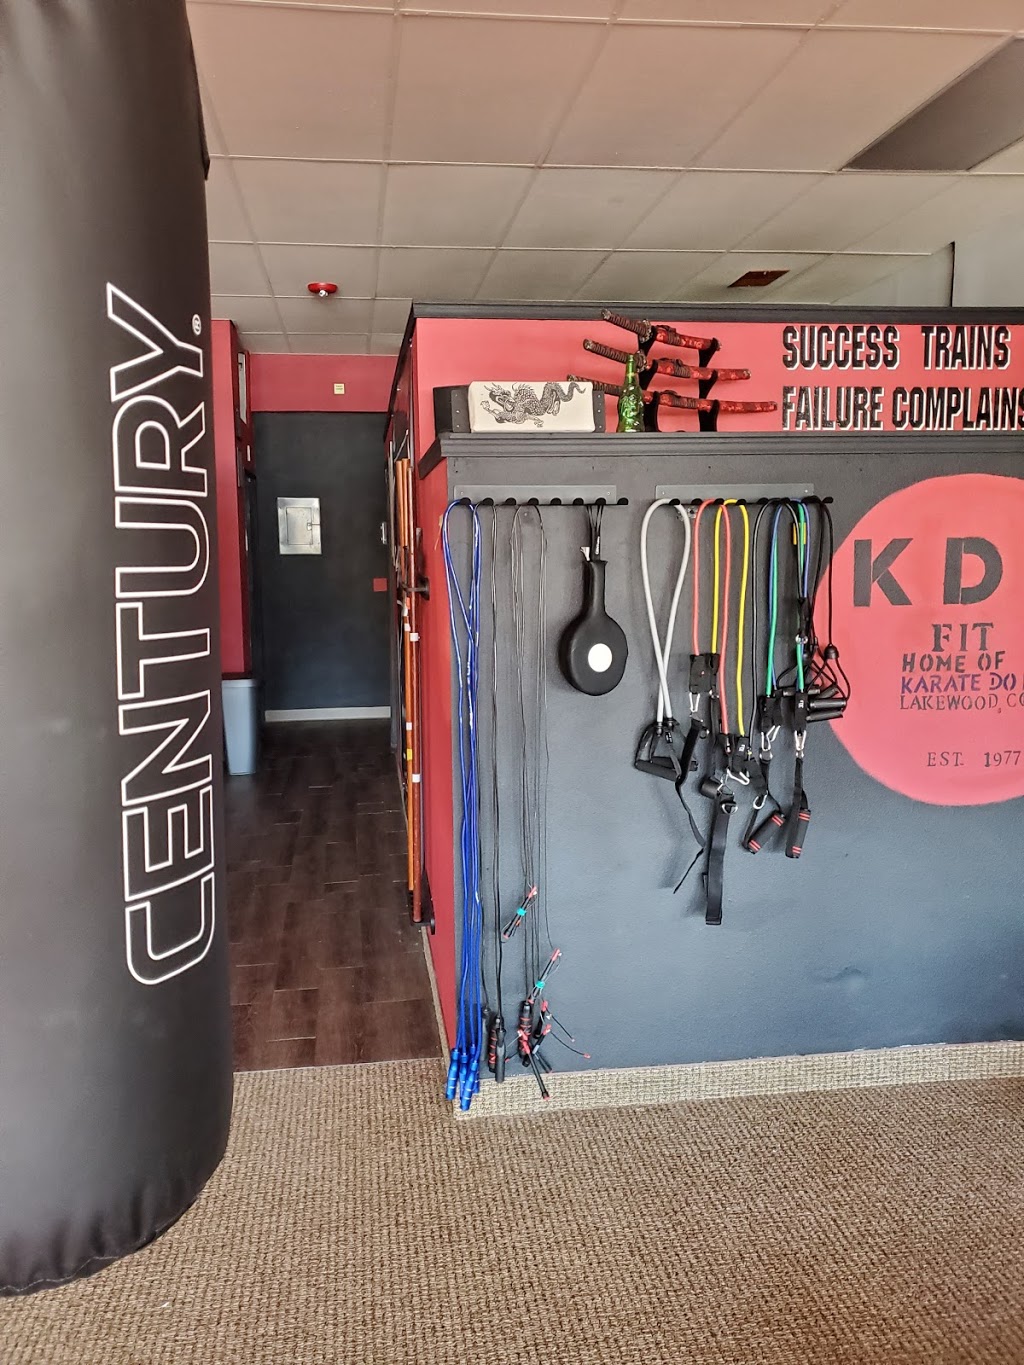 KDK Fit - Home of Karate Do Kan | 9797 W Colfax Ave Suite 3UU, Lakewood, CO 80215, USA | Phone: (720) 710-8708